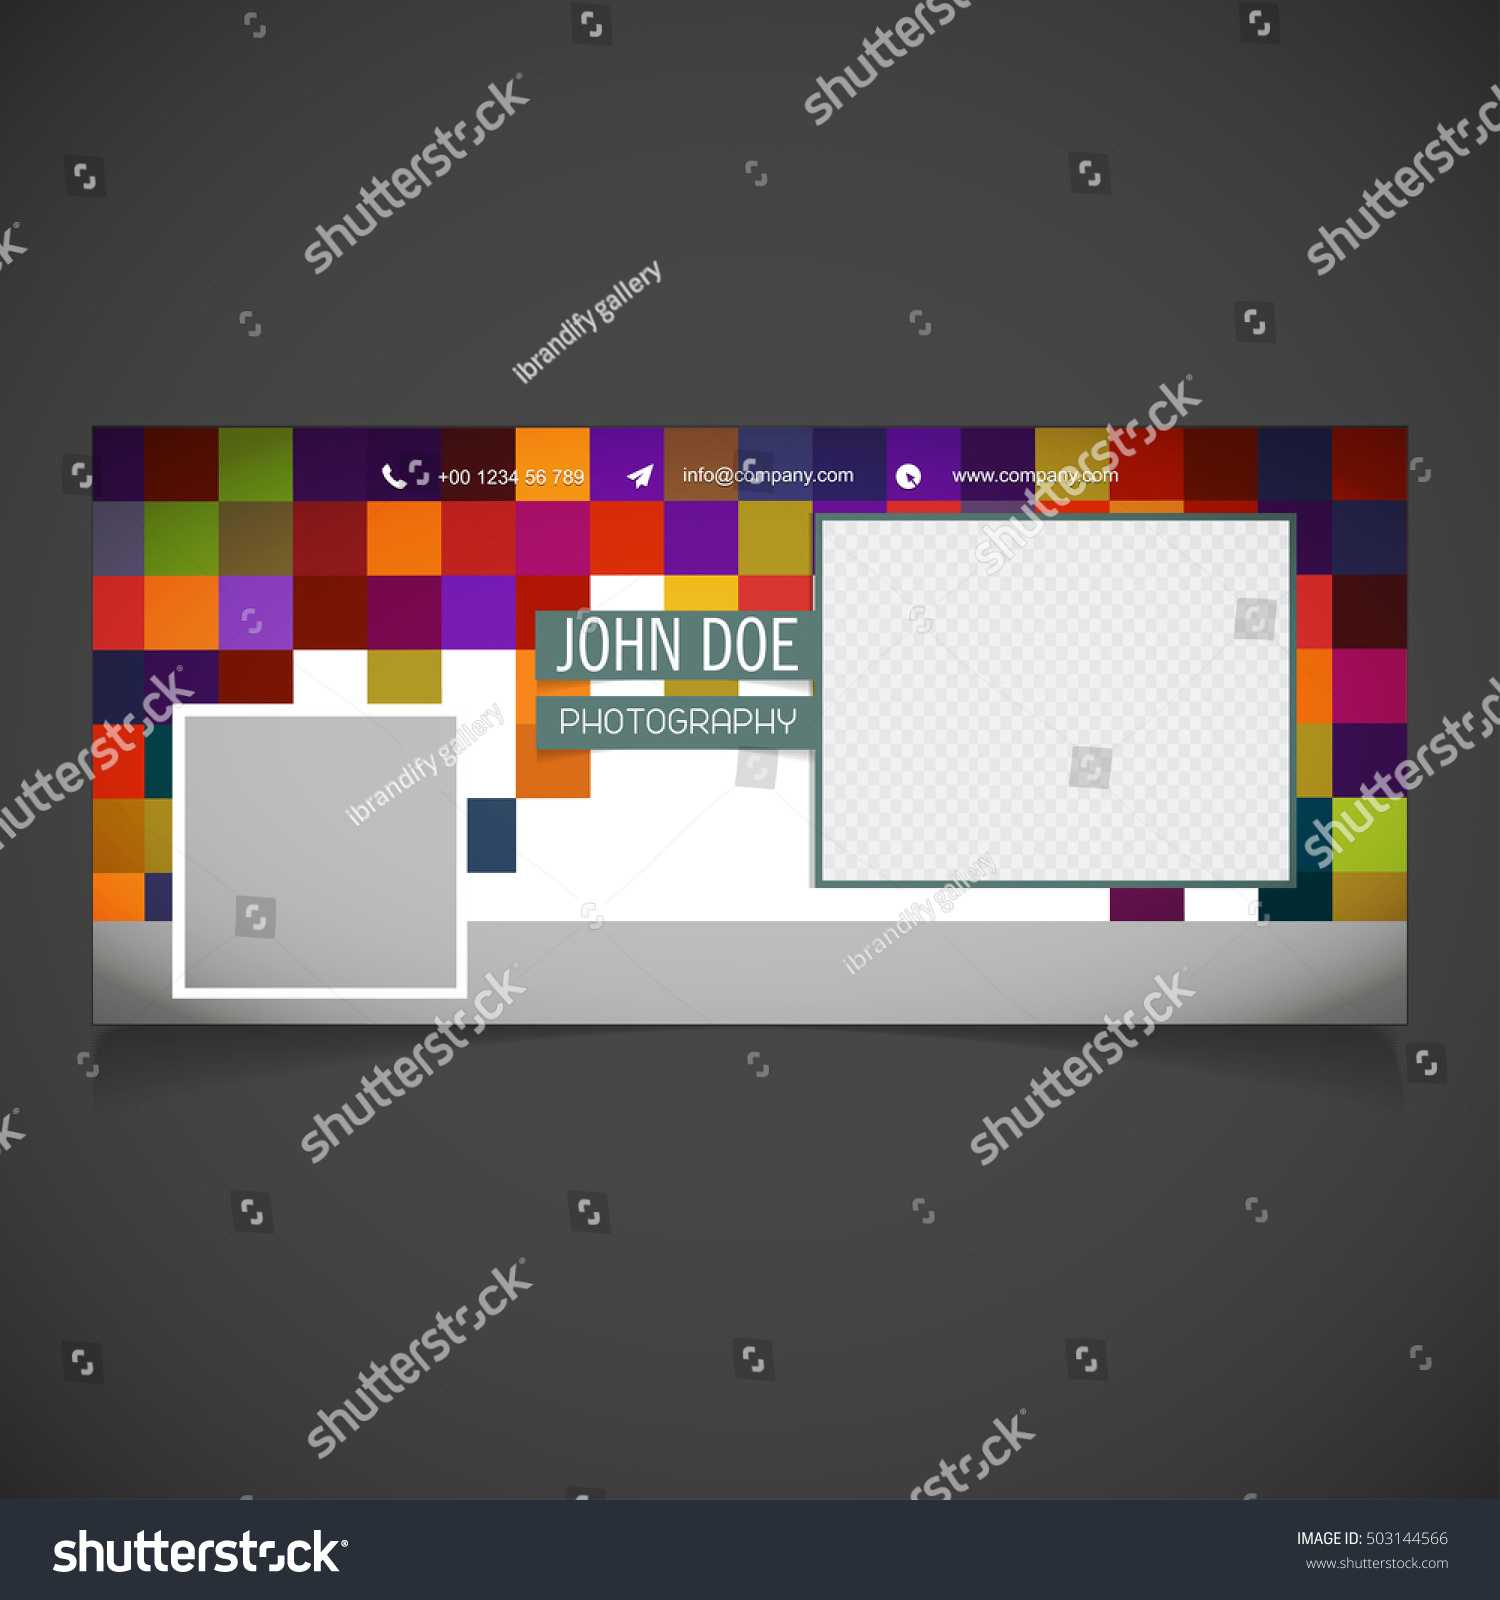 Creative Photography Banner Template Place Image Stock Inside Photography Banner Template